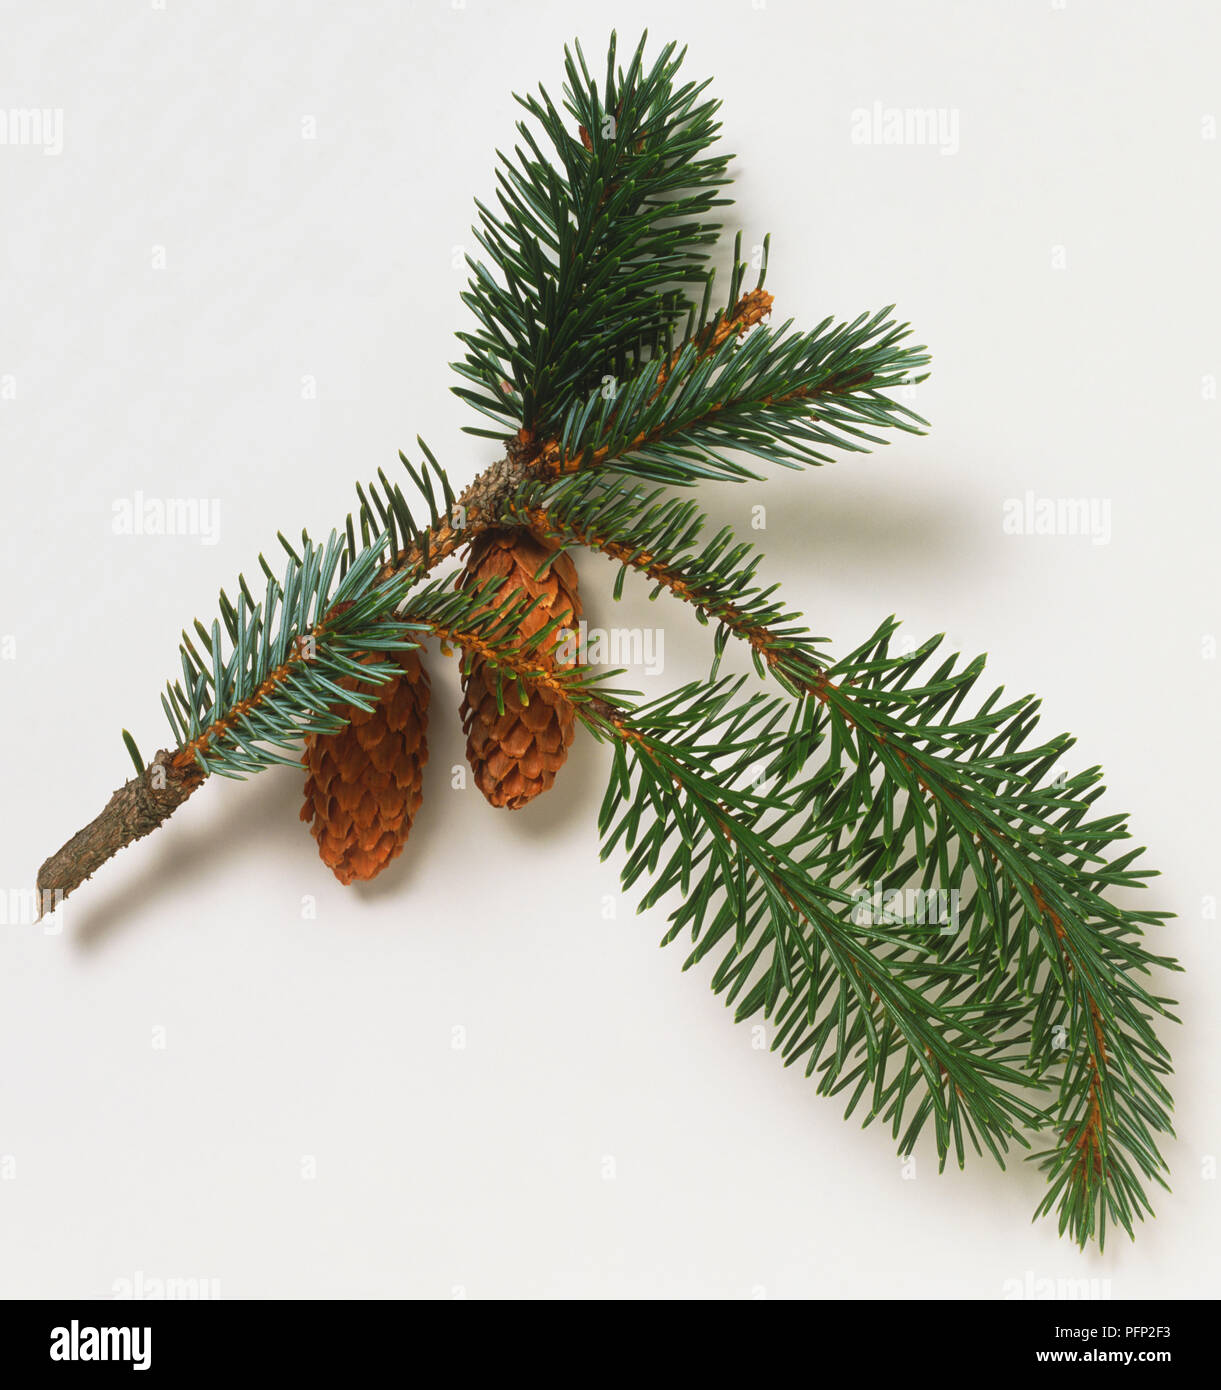 Picea sitchensis, Sitka Spruce needles and cones. Stock Photo